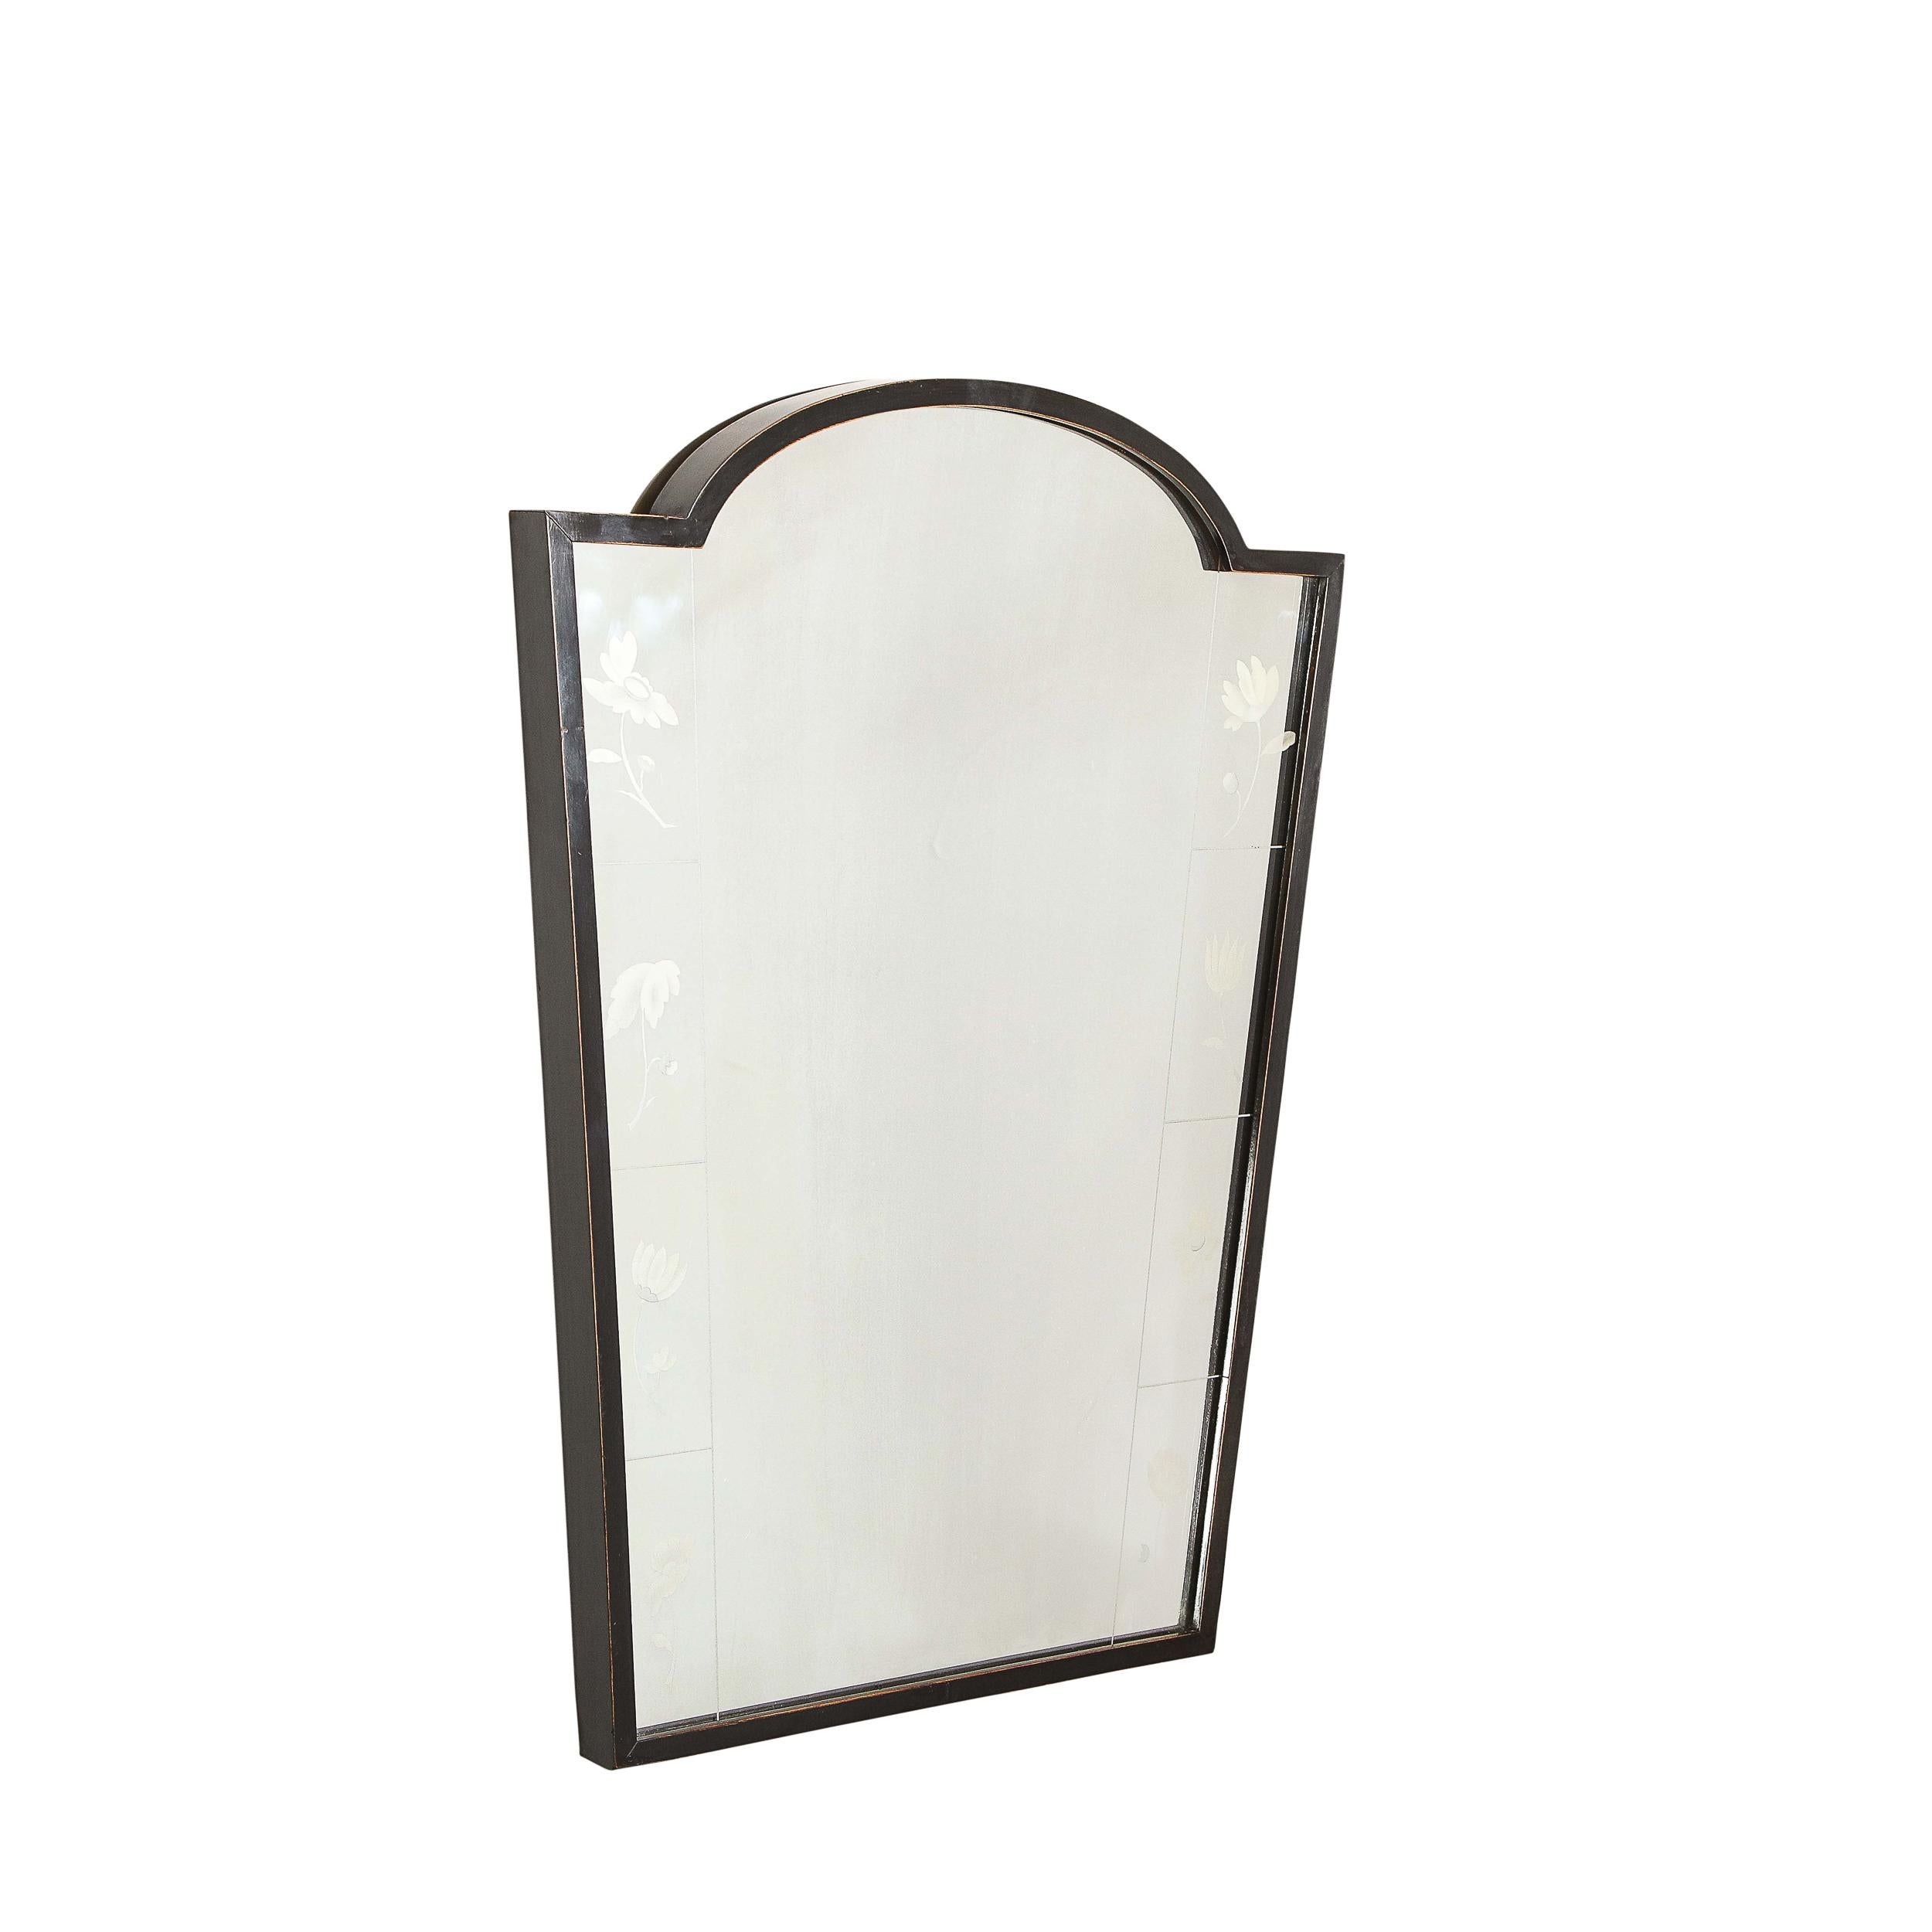 This stunning and refined Art Deco wall mirror was realized by the legendary designer Luigi Brusotti in Italy circa 1935. It features a skyscraper style form with a rhombus body that tapers to its base with acute angles at each corner, and a convex